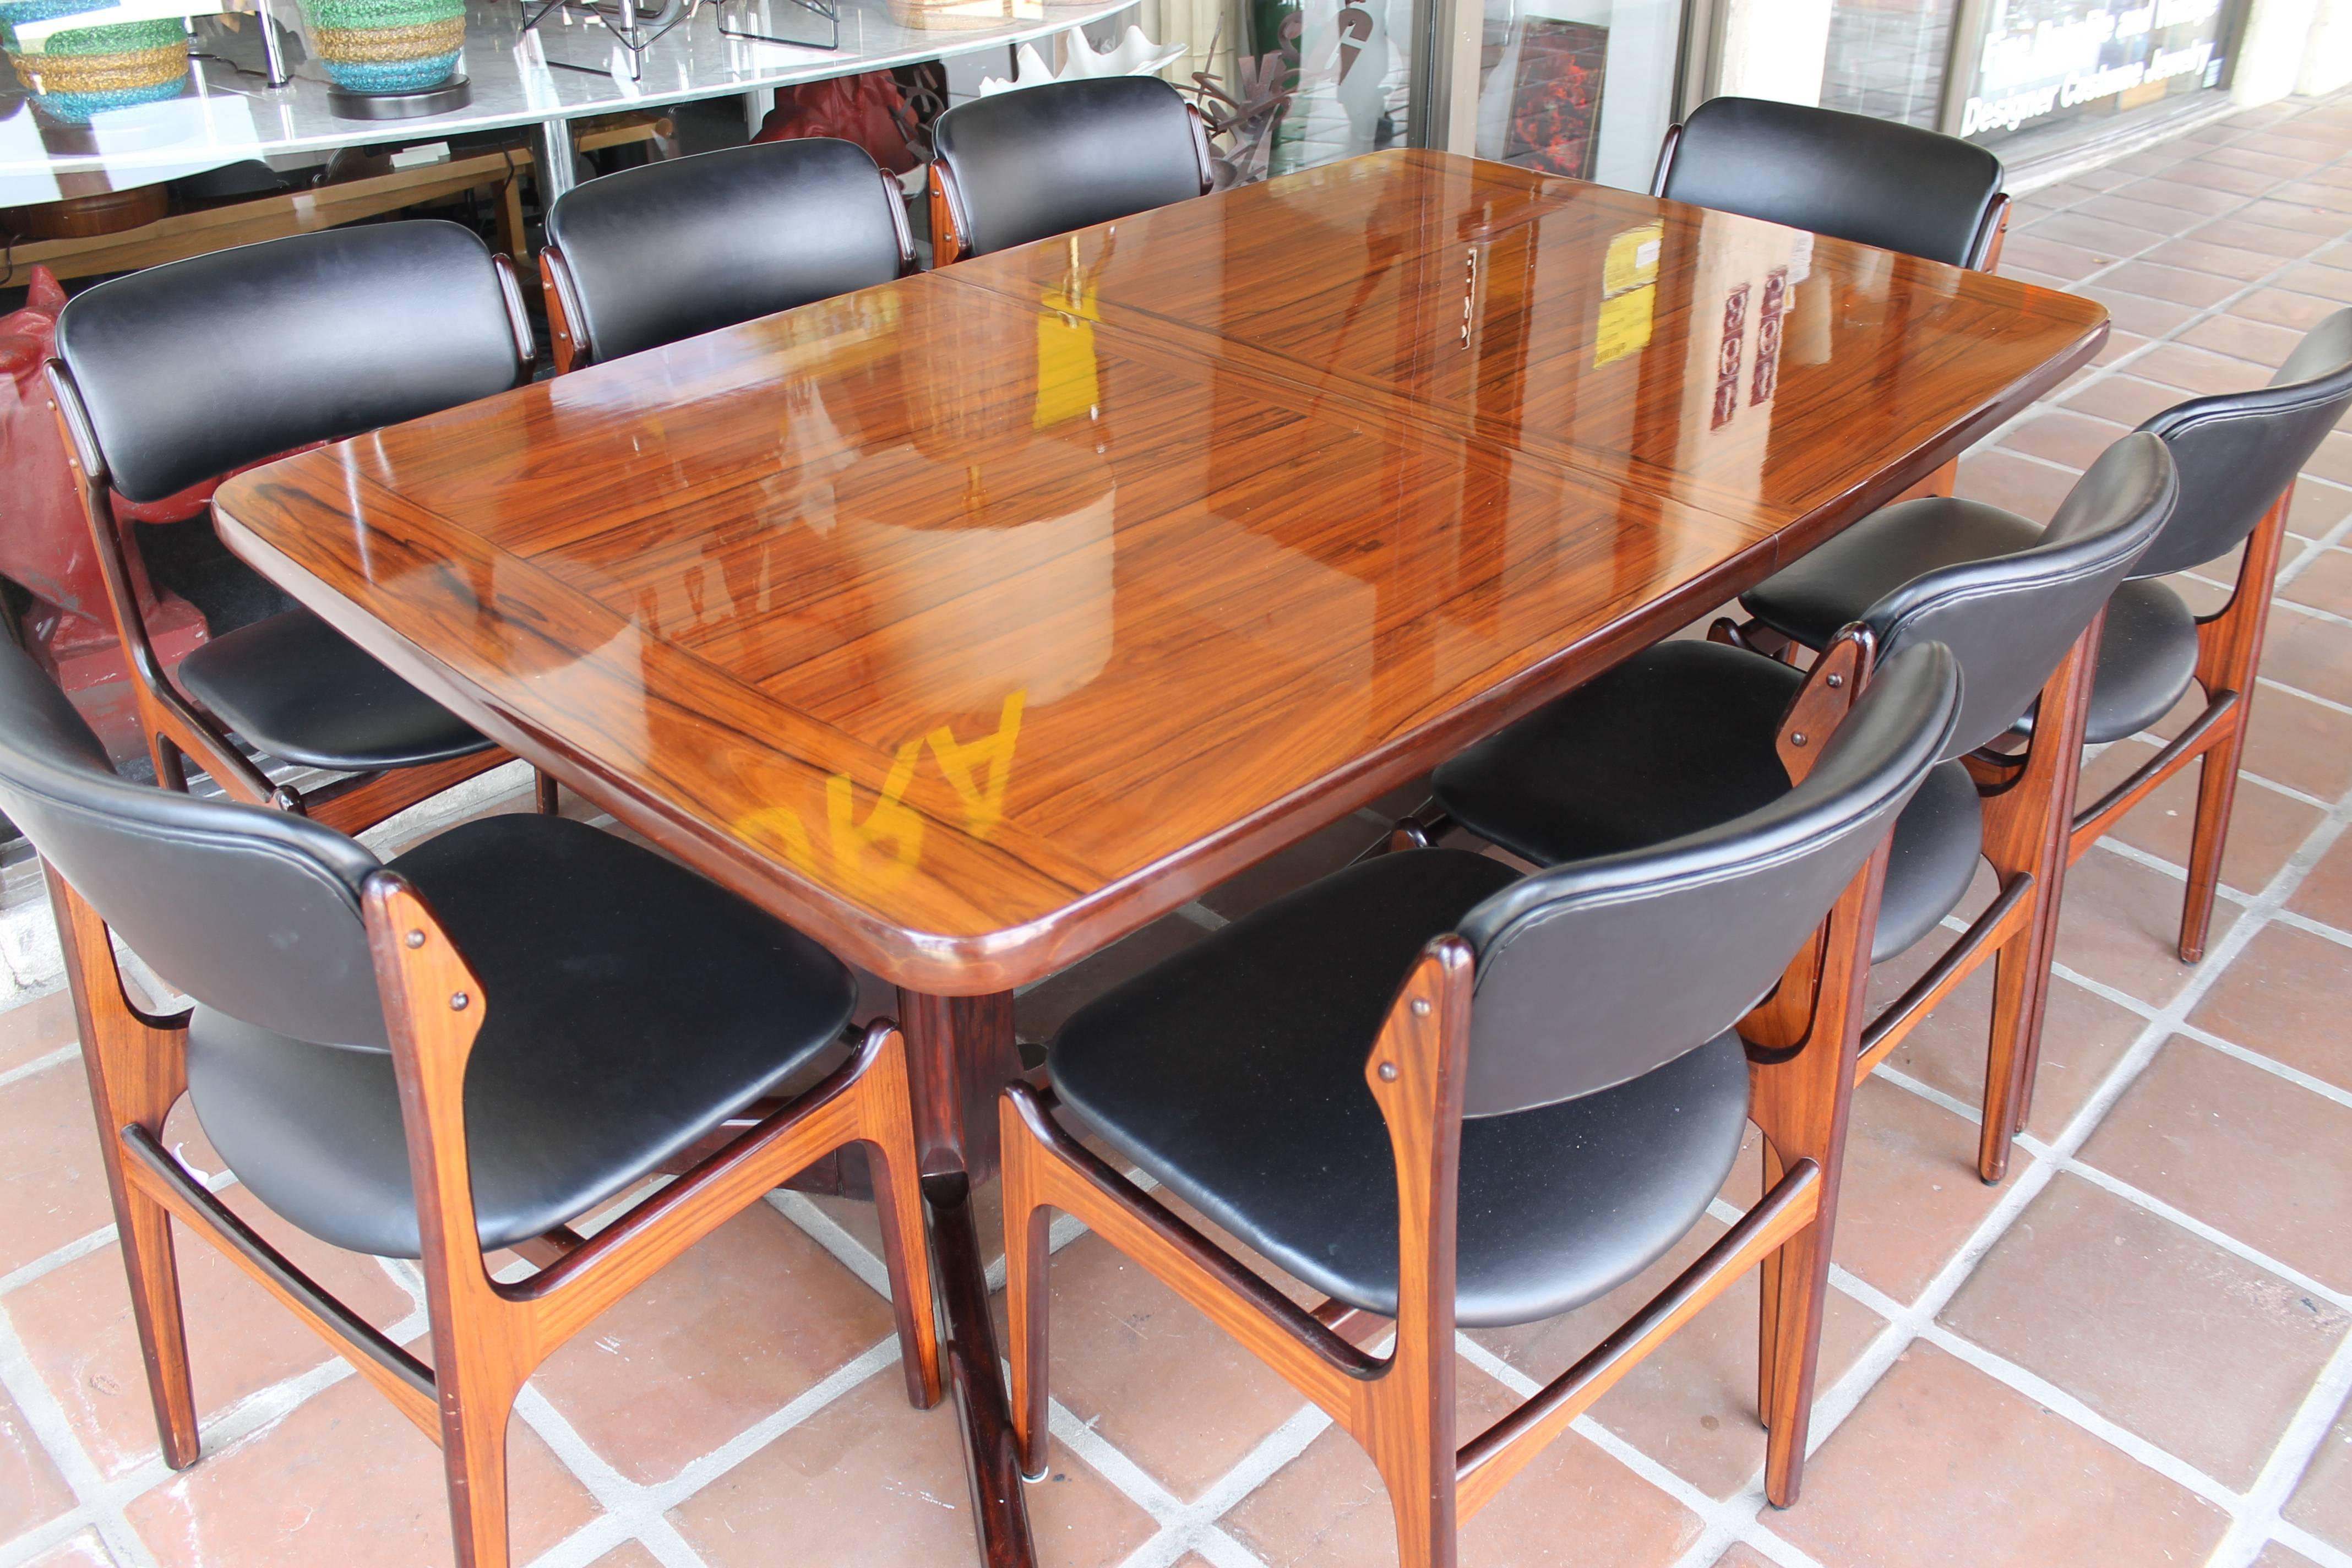 Incredible rosewood table and chairs. This set consists of 12 pieces (table, eight chairs, two leaves and stand for leaves). Table is about 9 feet wide with both leaves in place. Current picture of table measures 68.25” wide without leaves, 41.75”